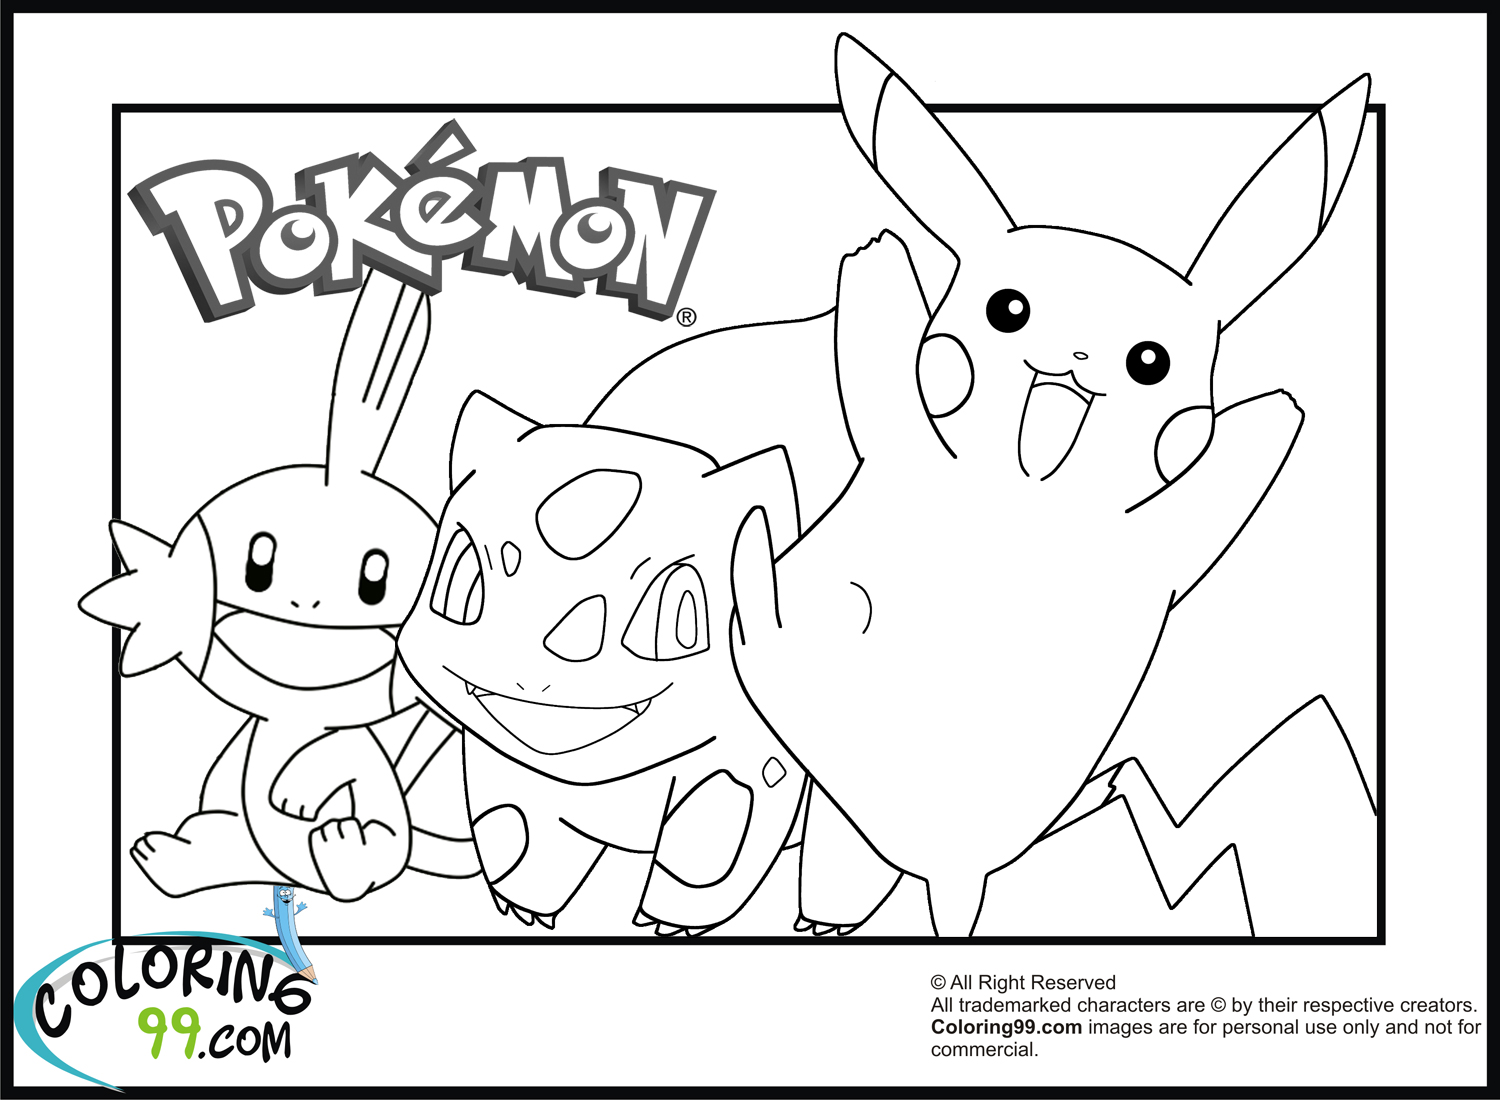 pikachu and friends coloring pages